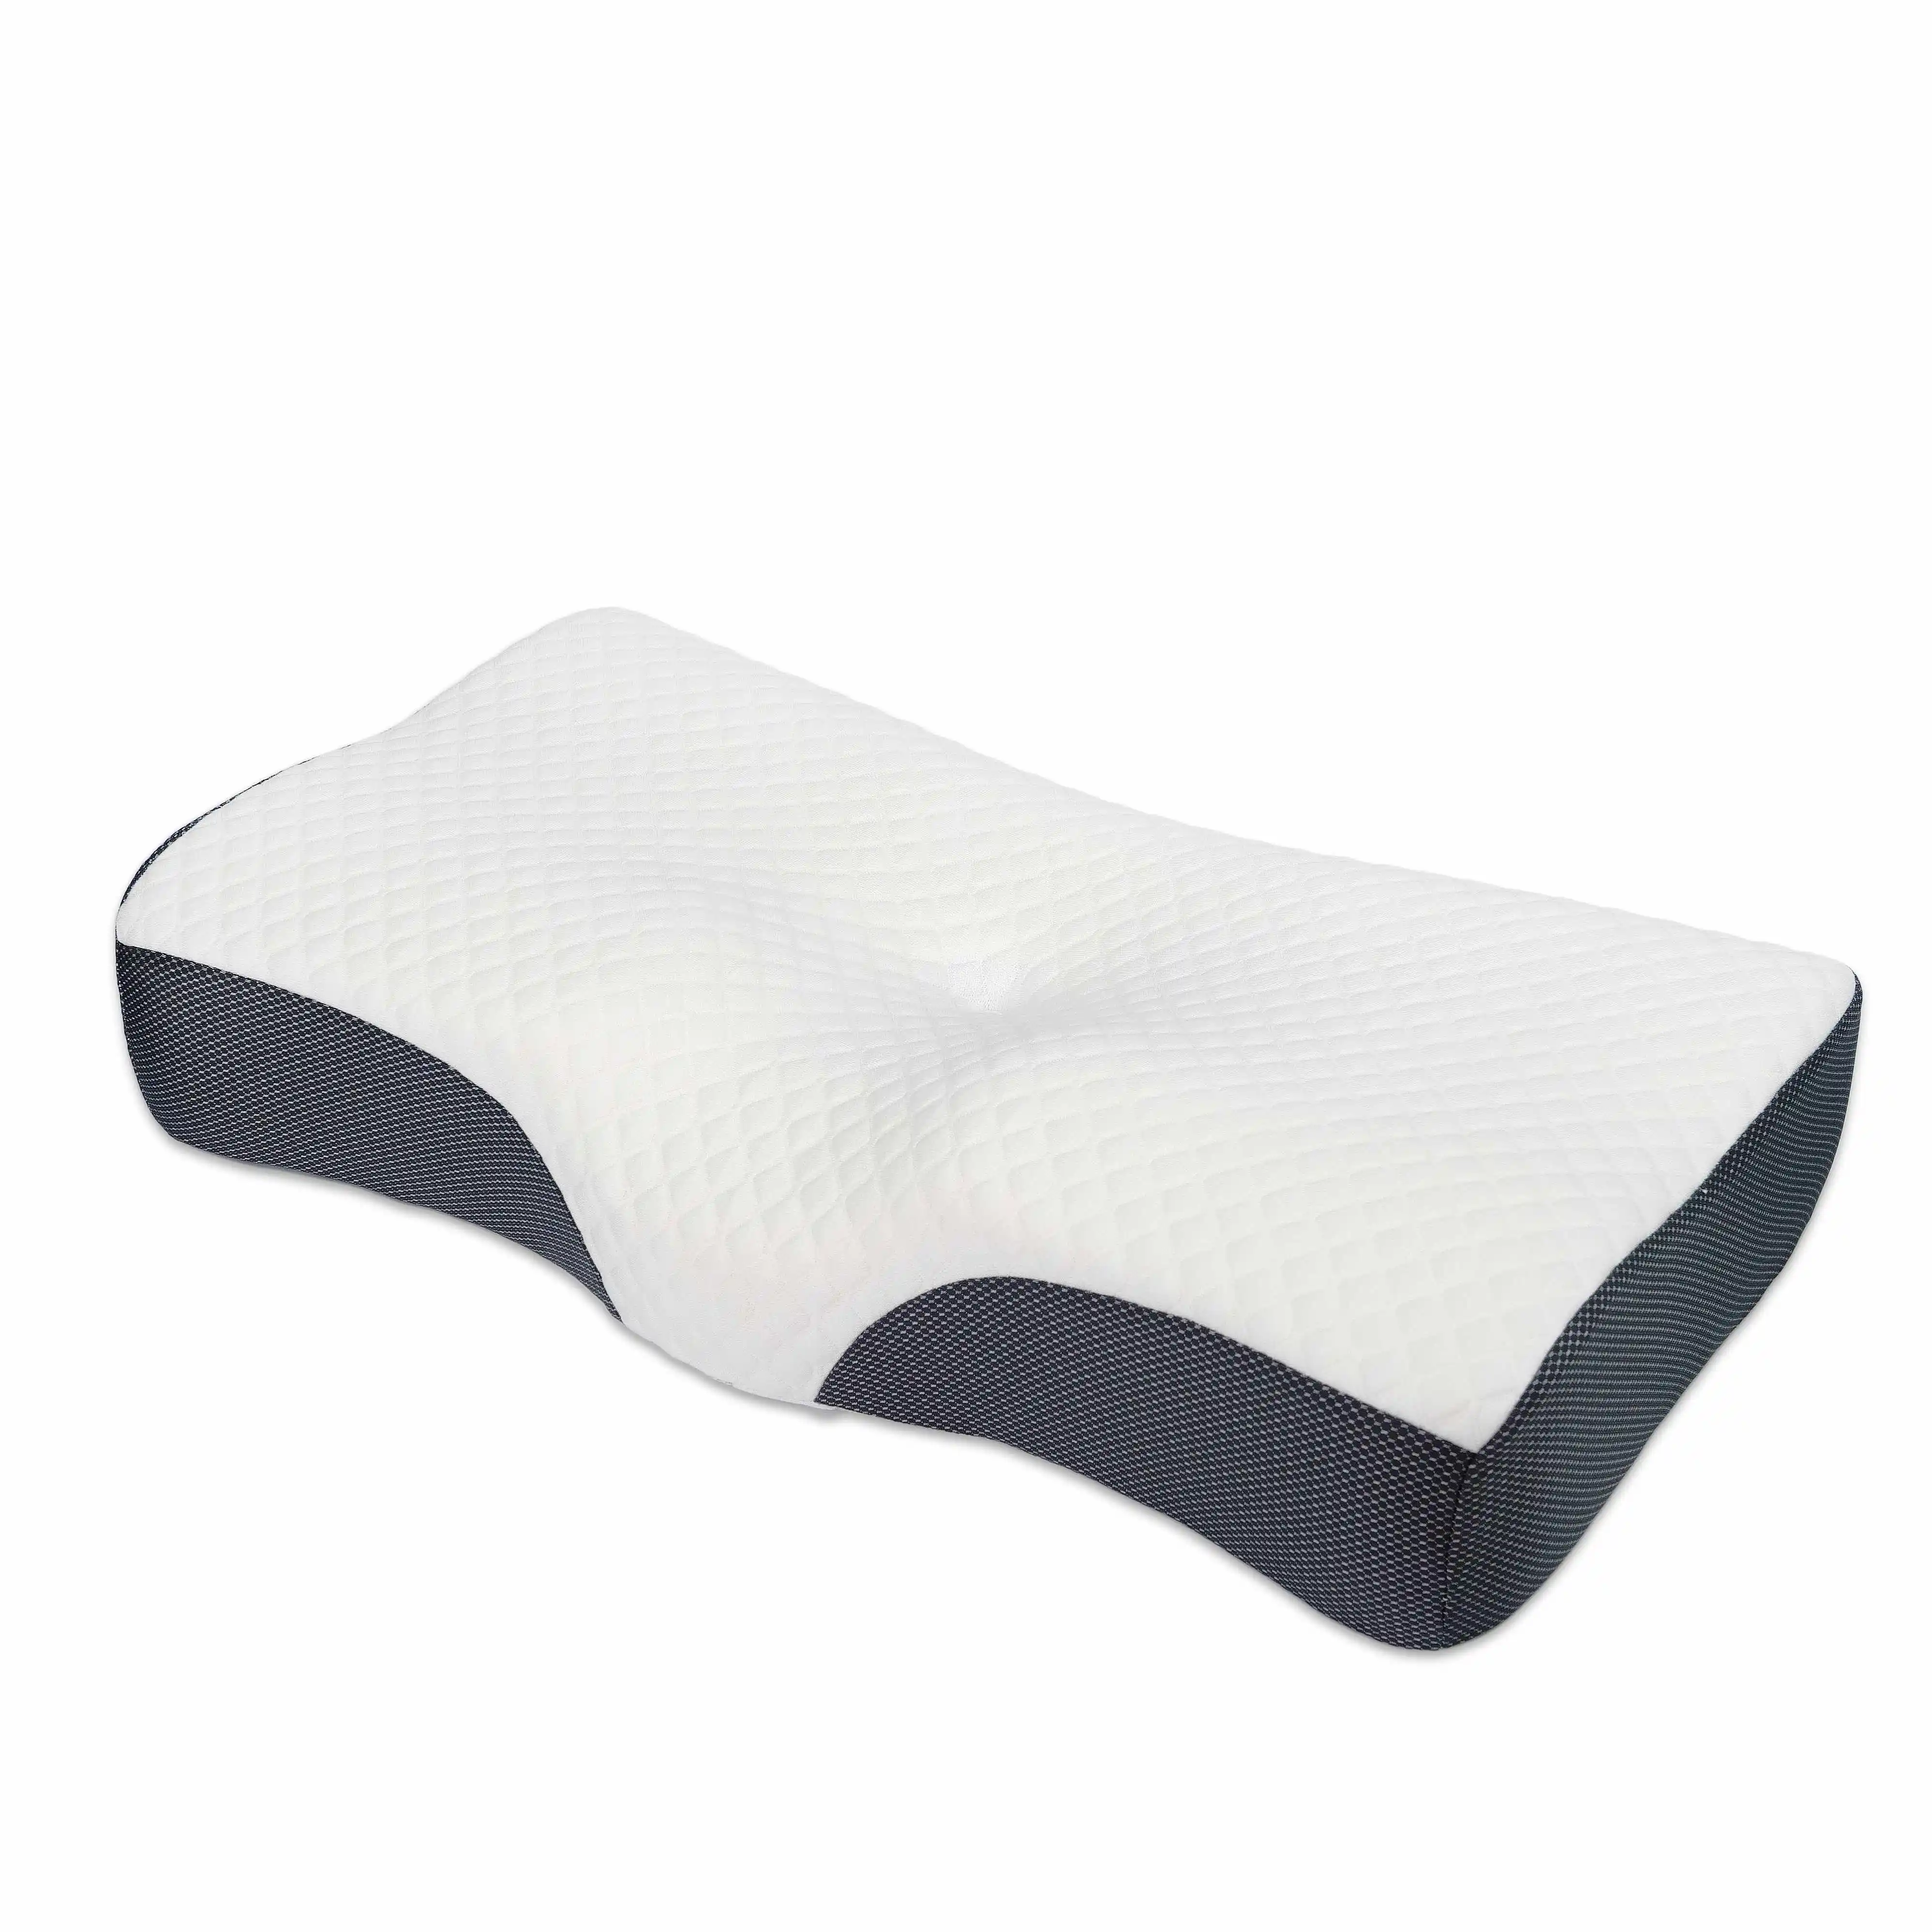 Adjustable Cervical Repair Pillow for Neck Pain Relief and Posture Correction